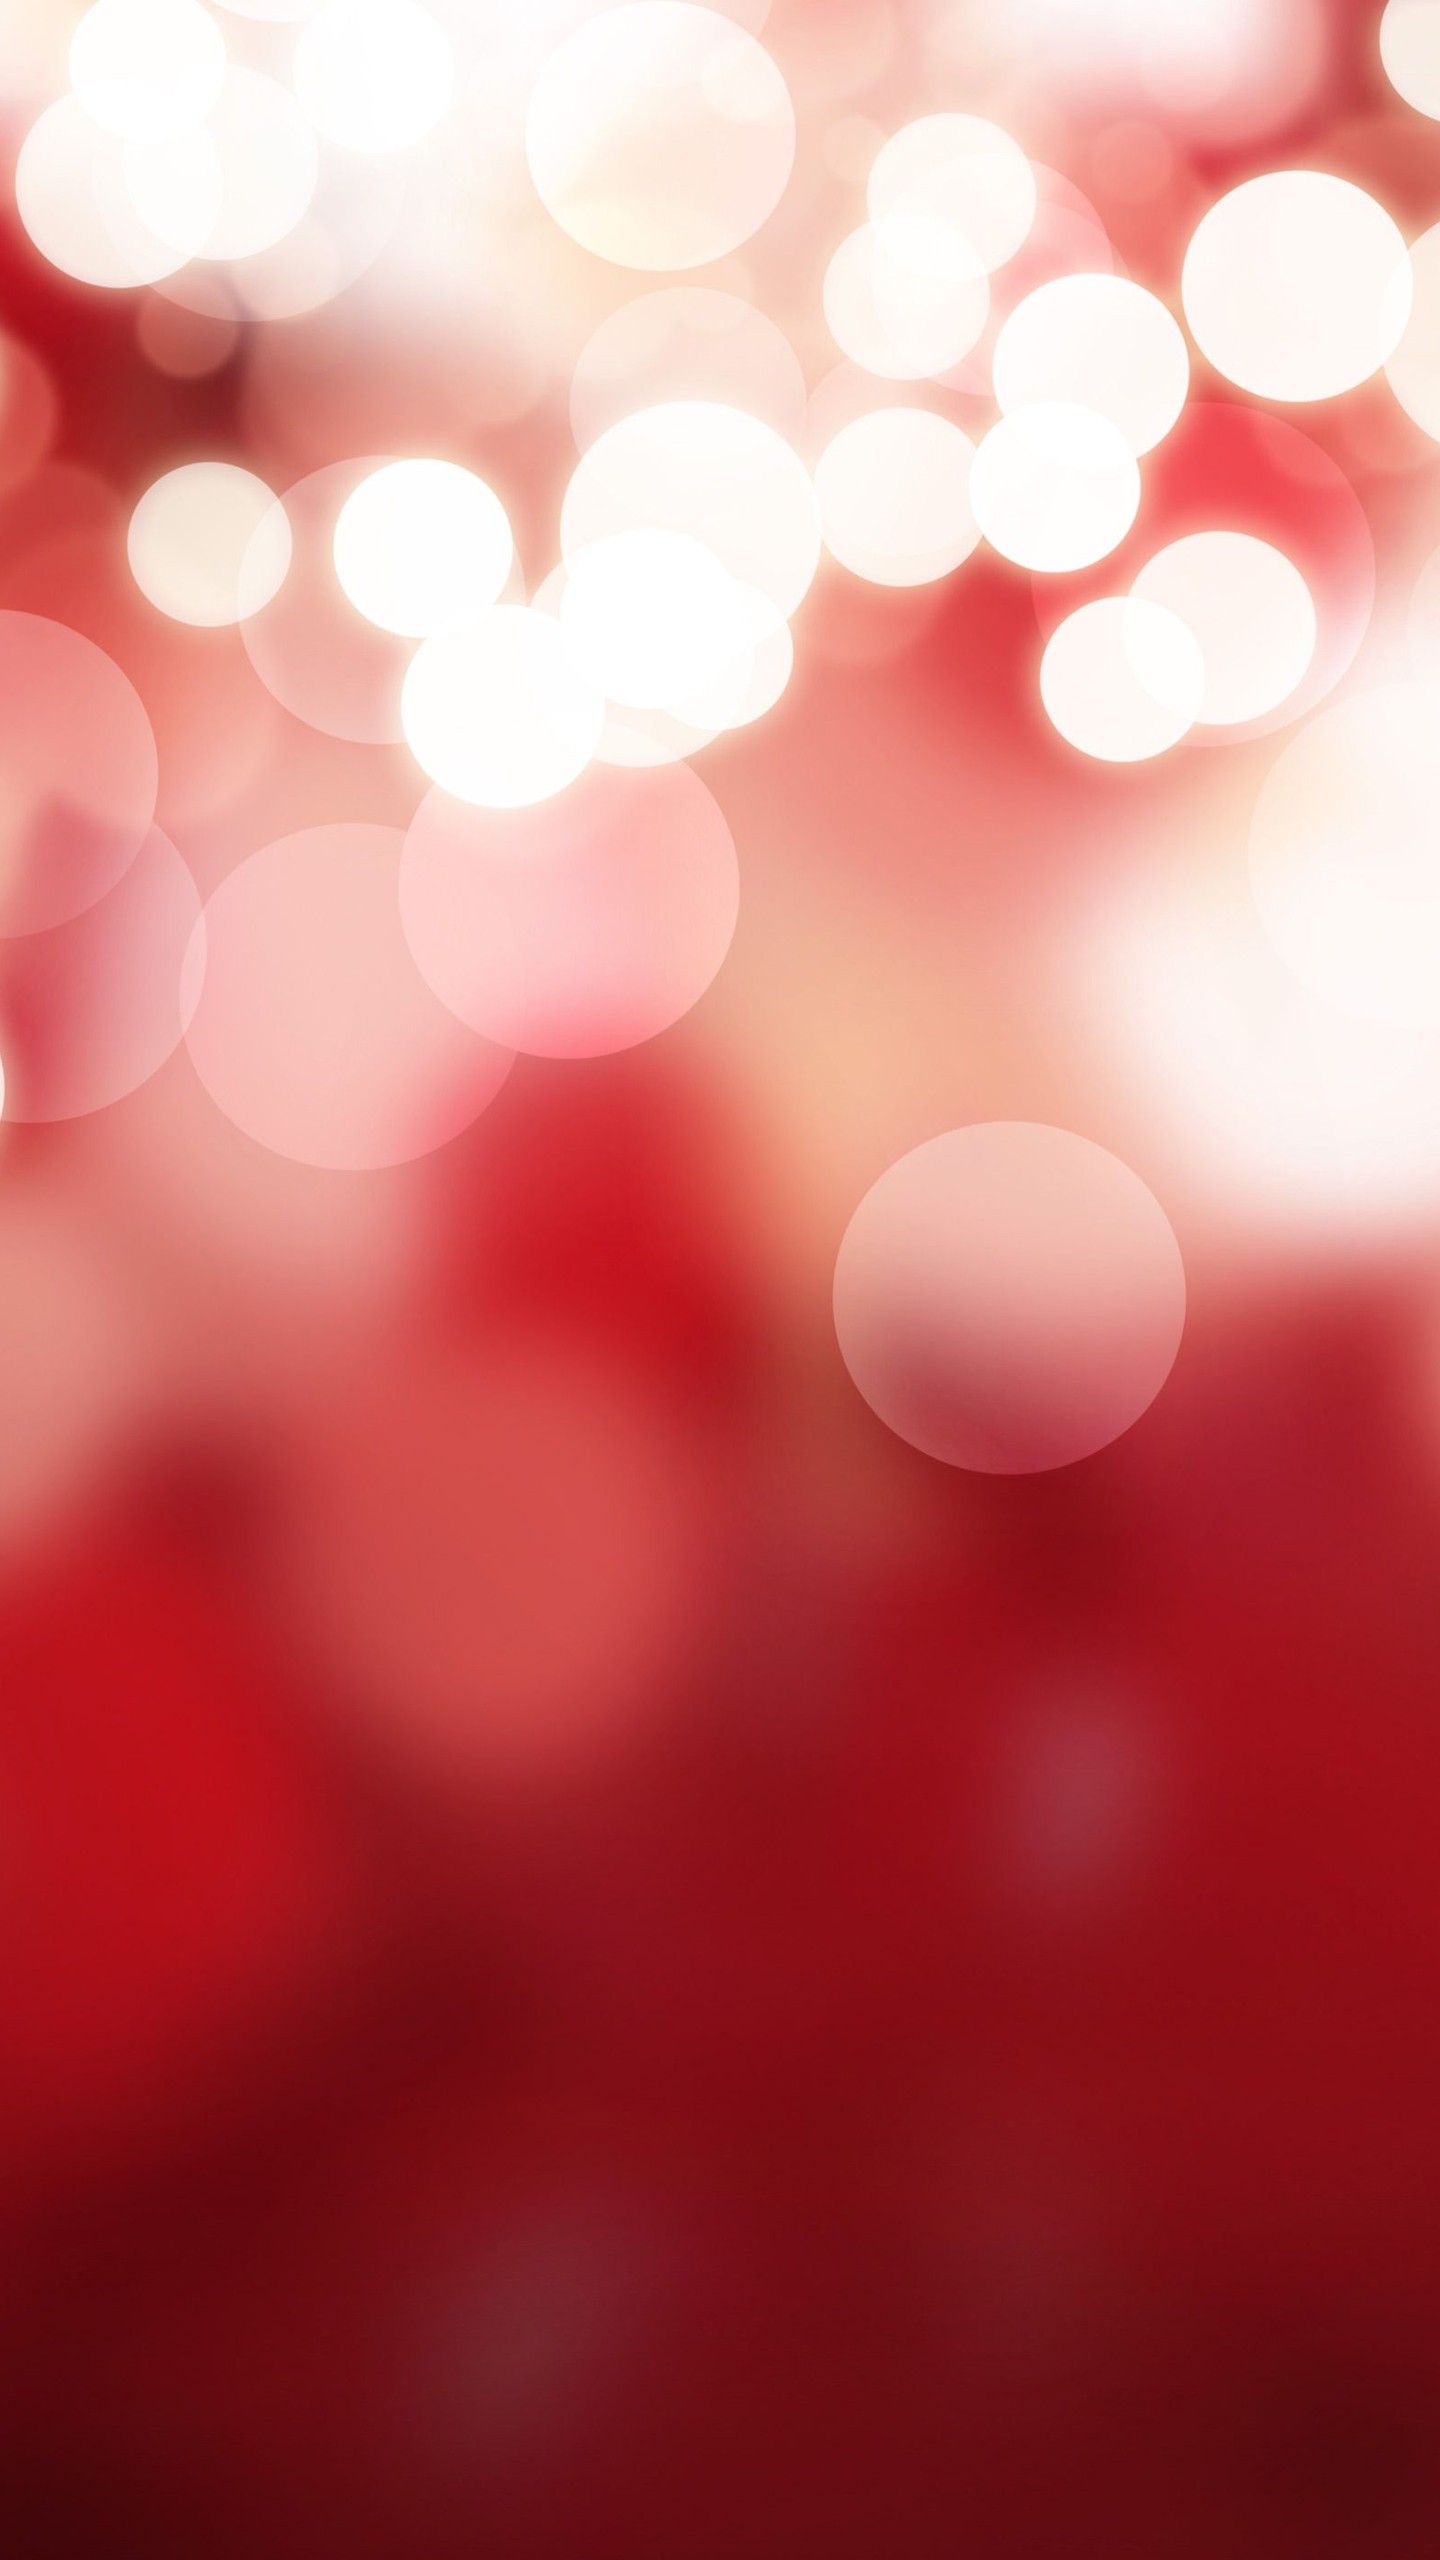 Red Bokeh iPhone 8 wallpaper, HD Abstract, 4k Wallpapers, Images, Backgrounds, Photos and Pictures - Blurry, iPhone red